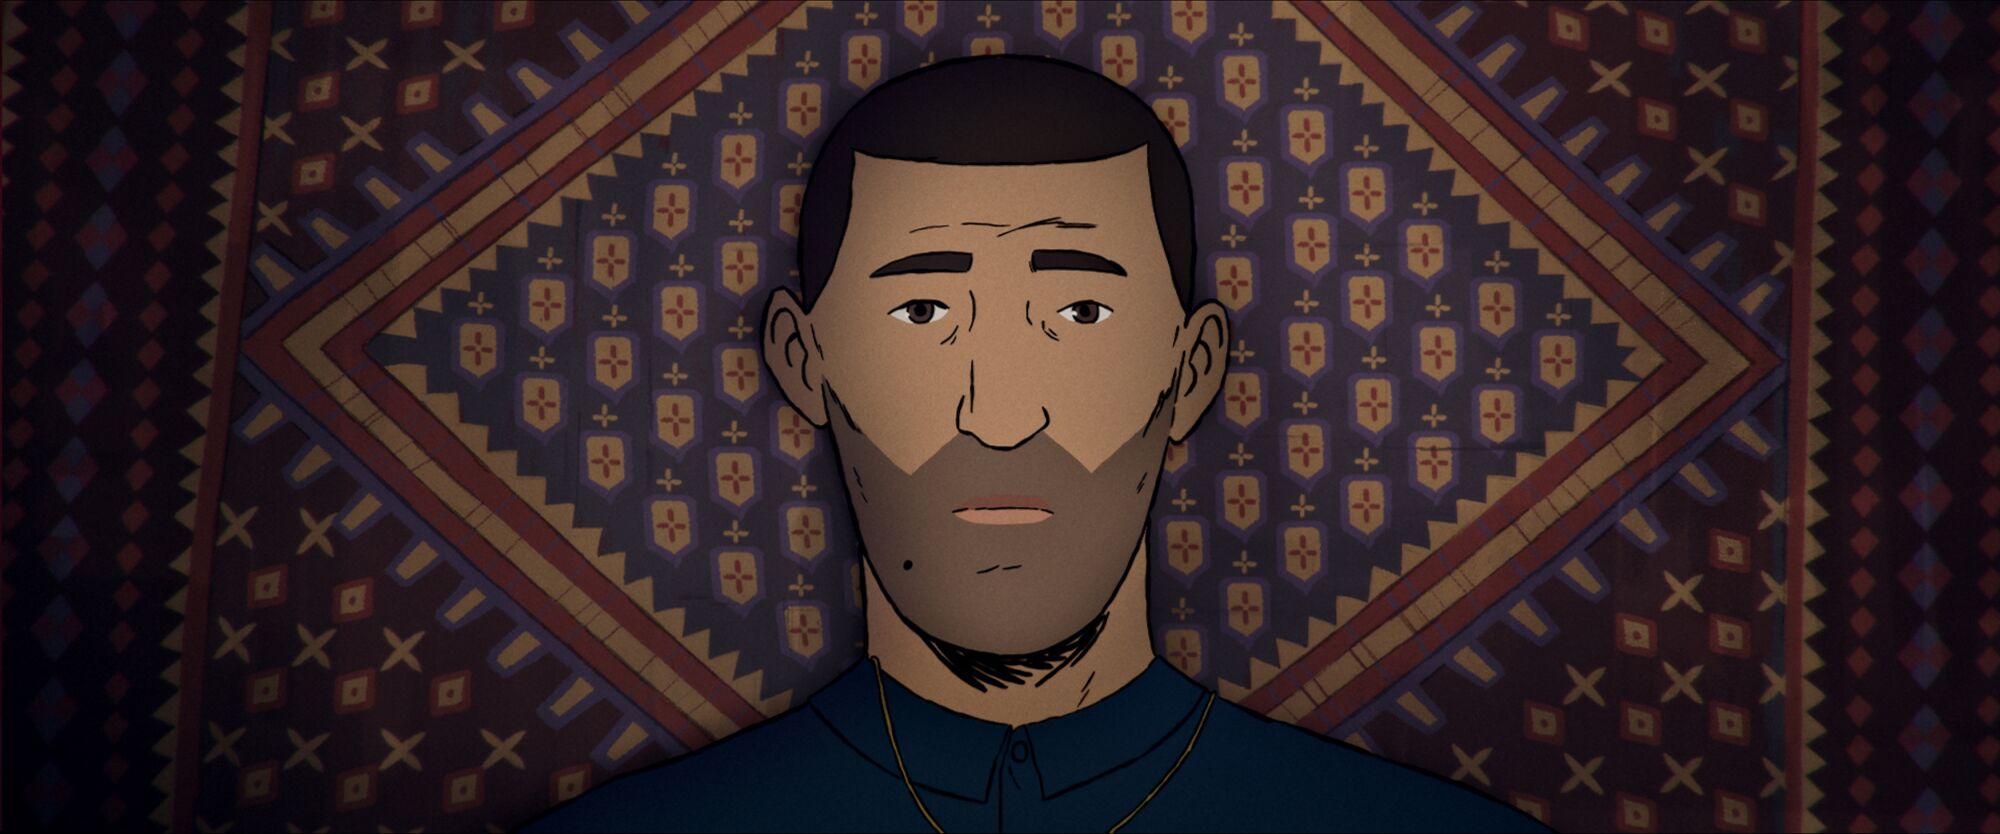 The character Amin in the animated documentary, "Flee"